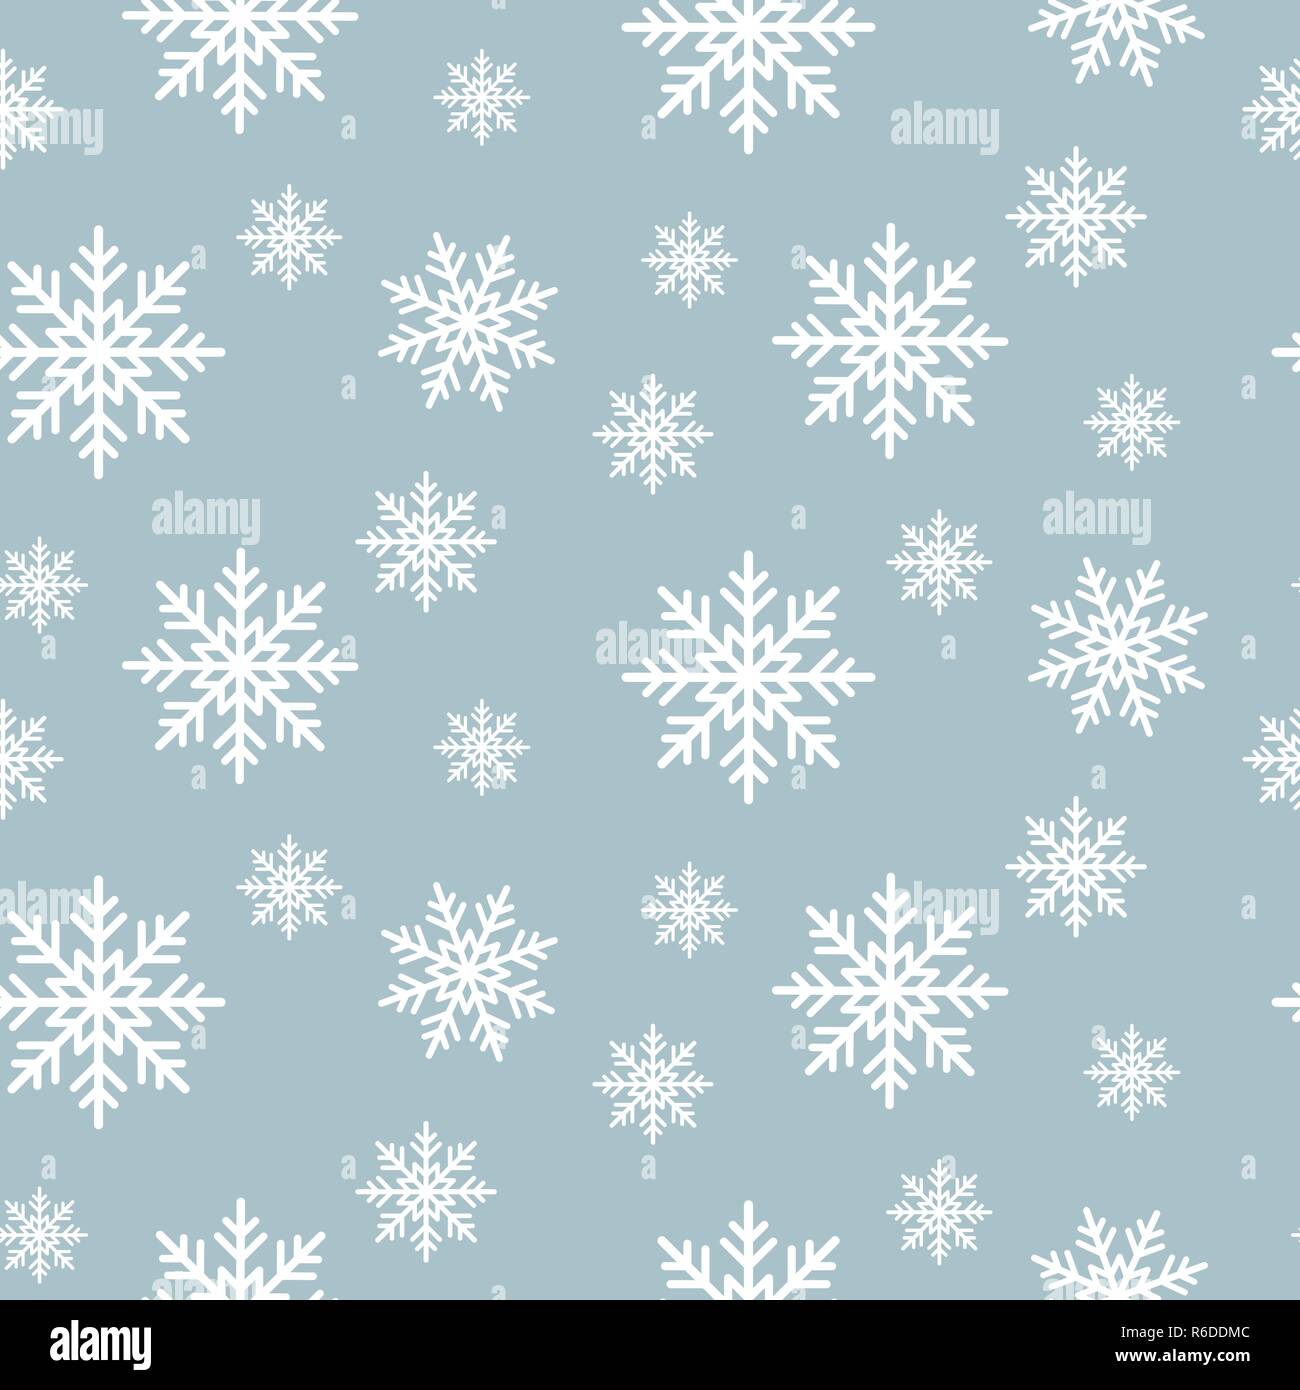 Snowflake seamless pattern. Snow flakes on blue winter background. Abstract wallpaper and gift paper wrap design. Stock Vector